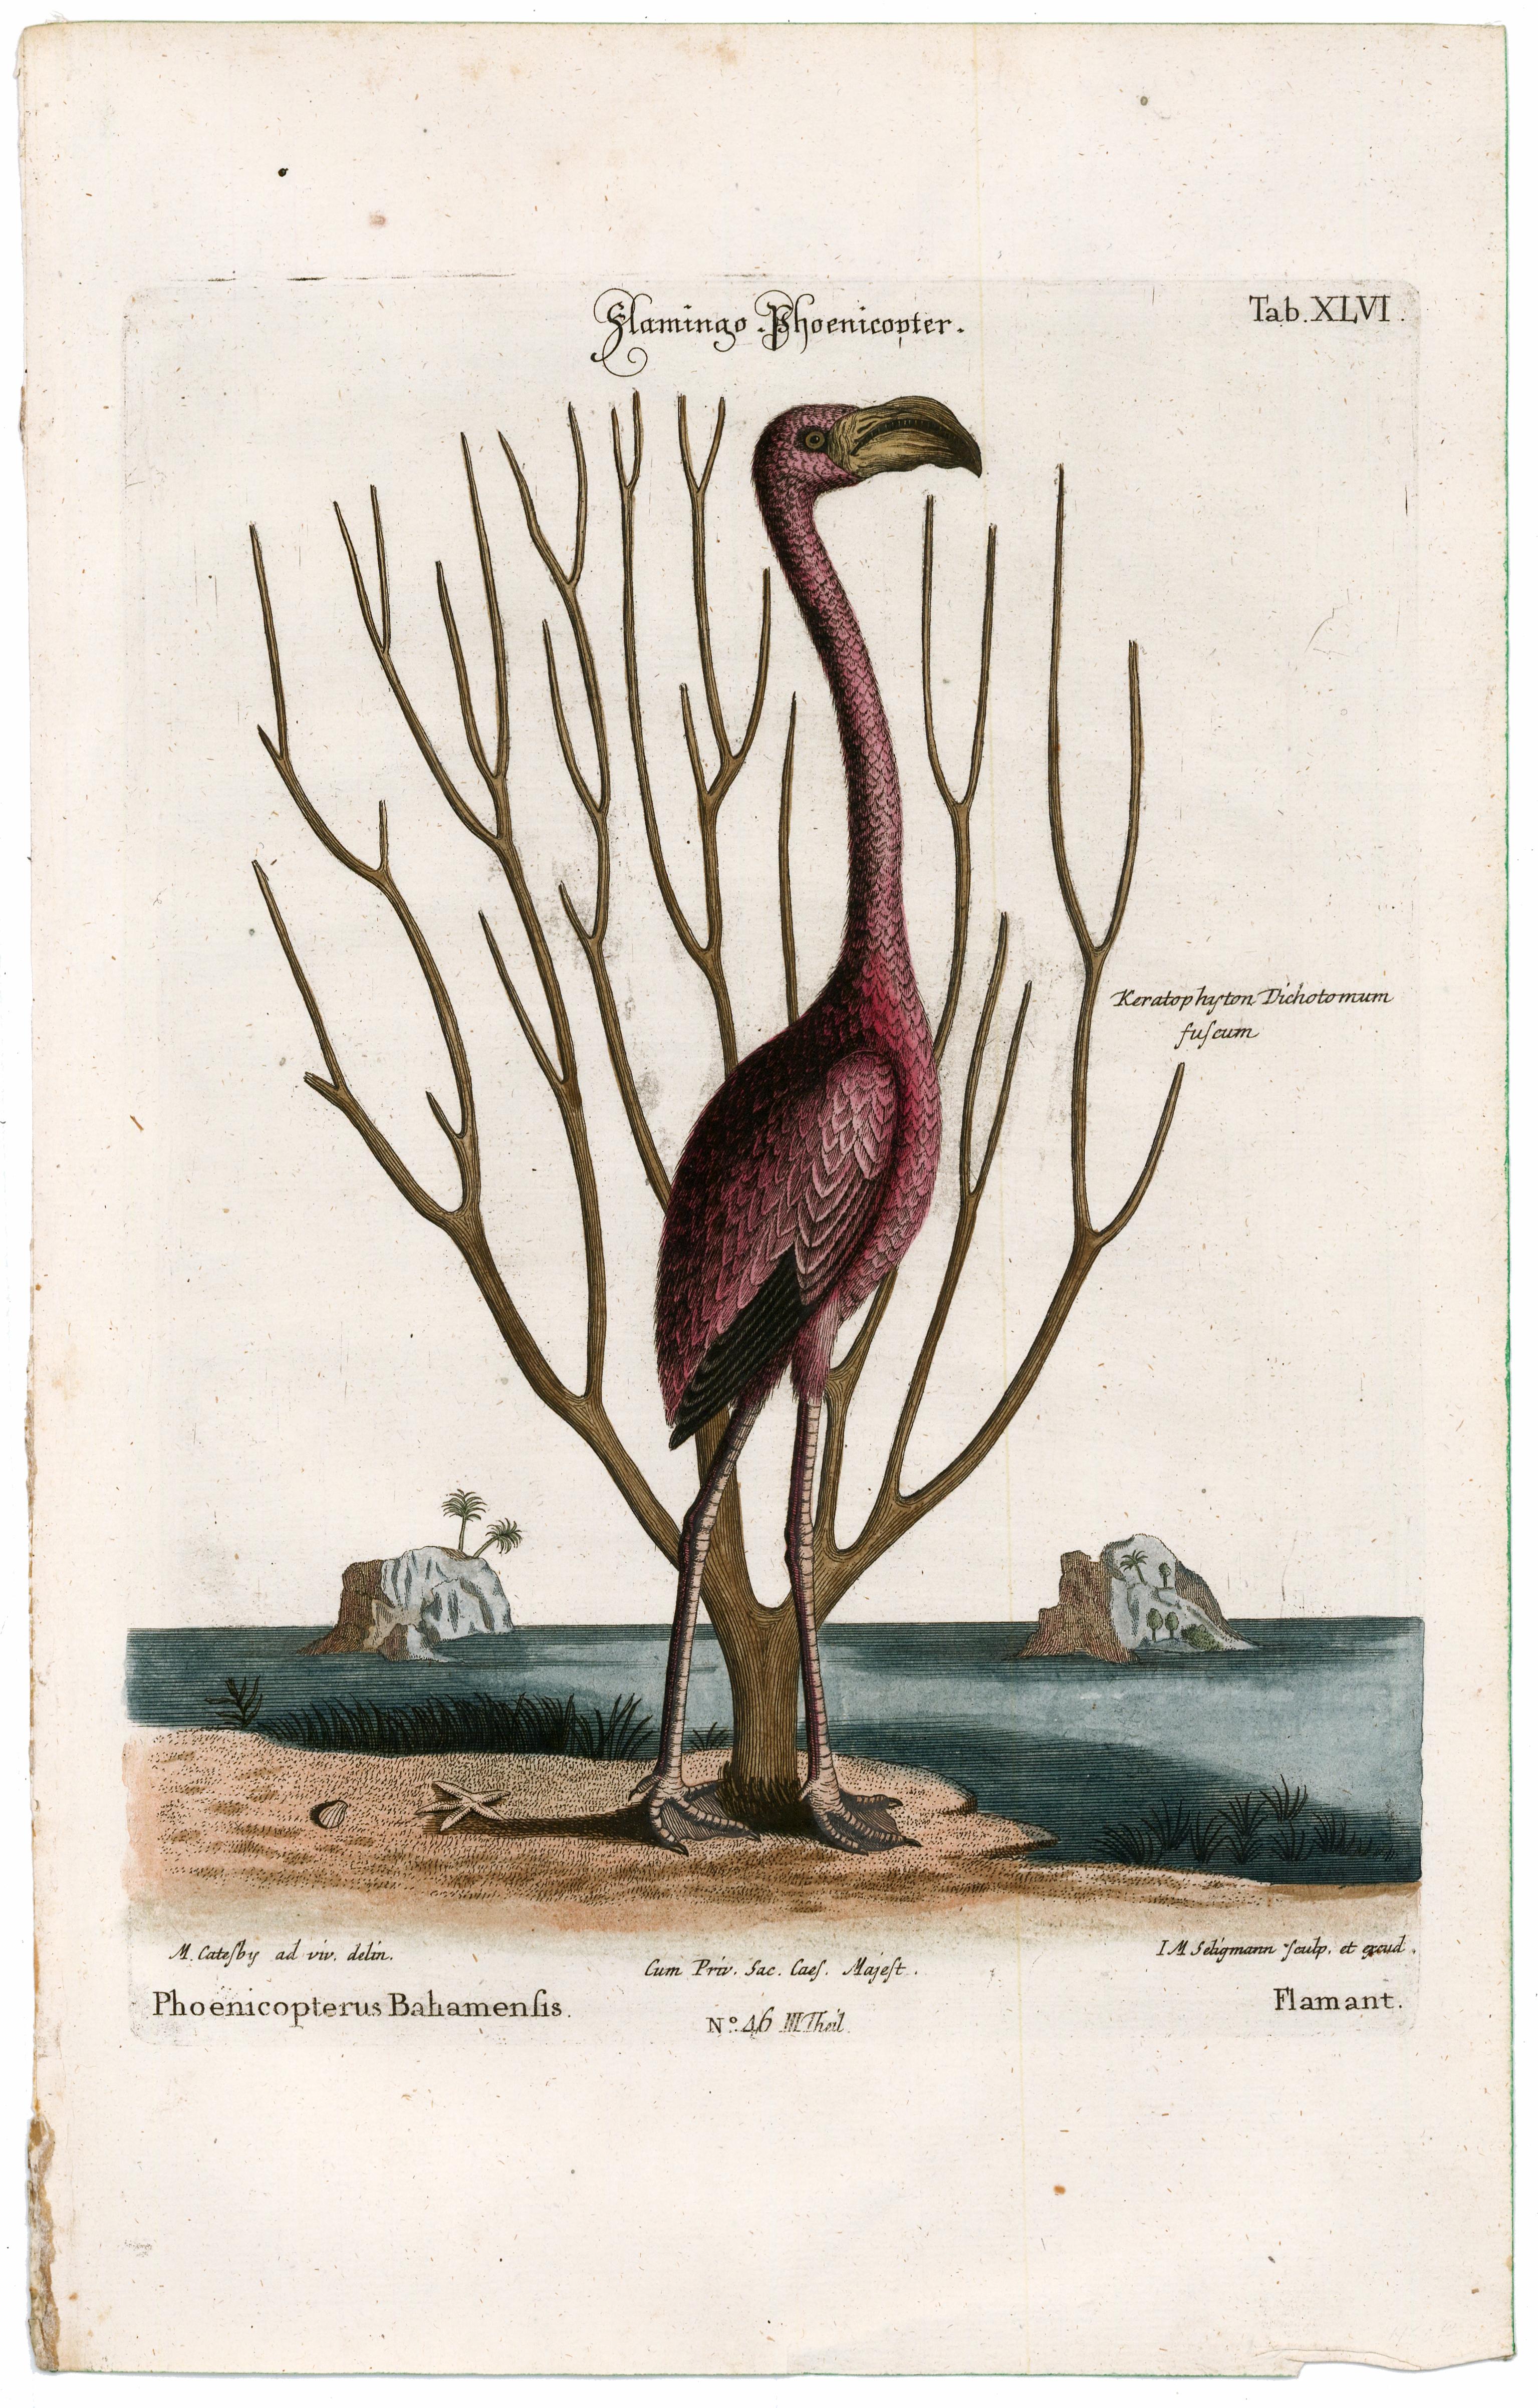 Original engraving, hand-colored at publication,  after the work of Mark Catesby by Johann Michael Seligmann from 